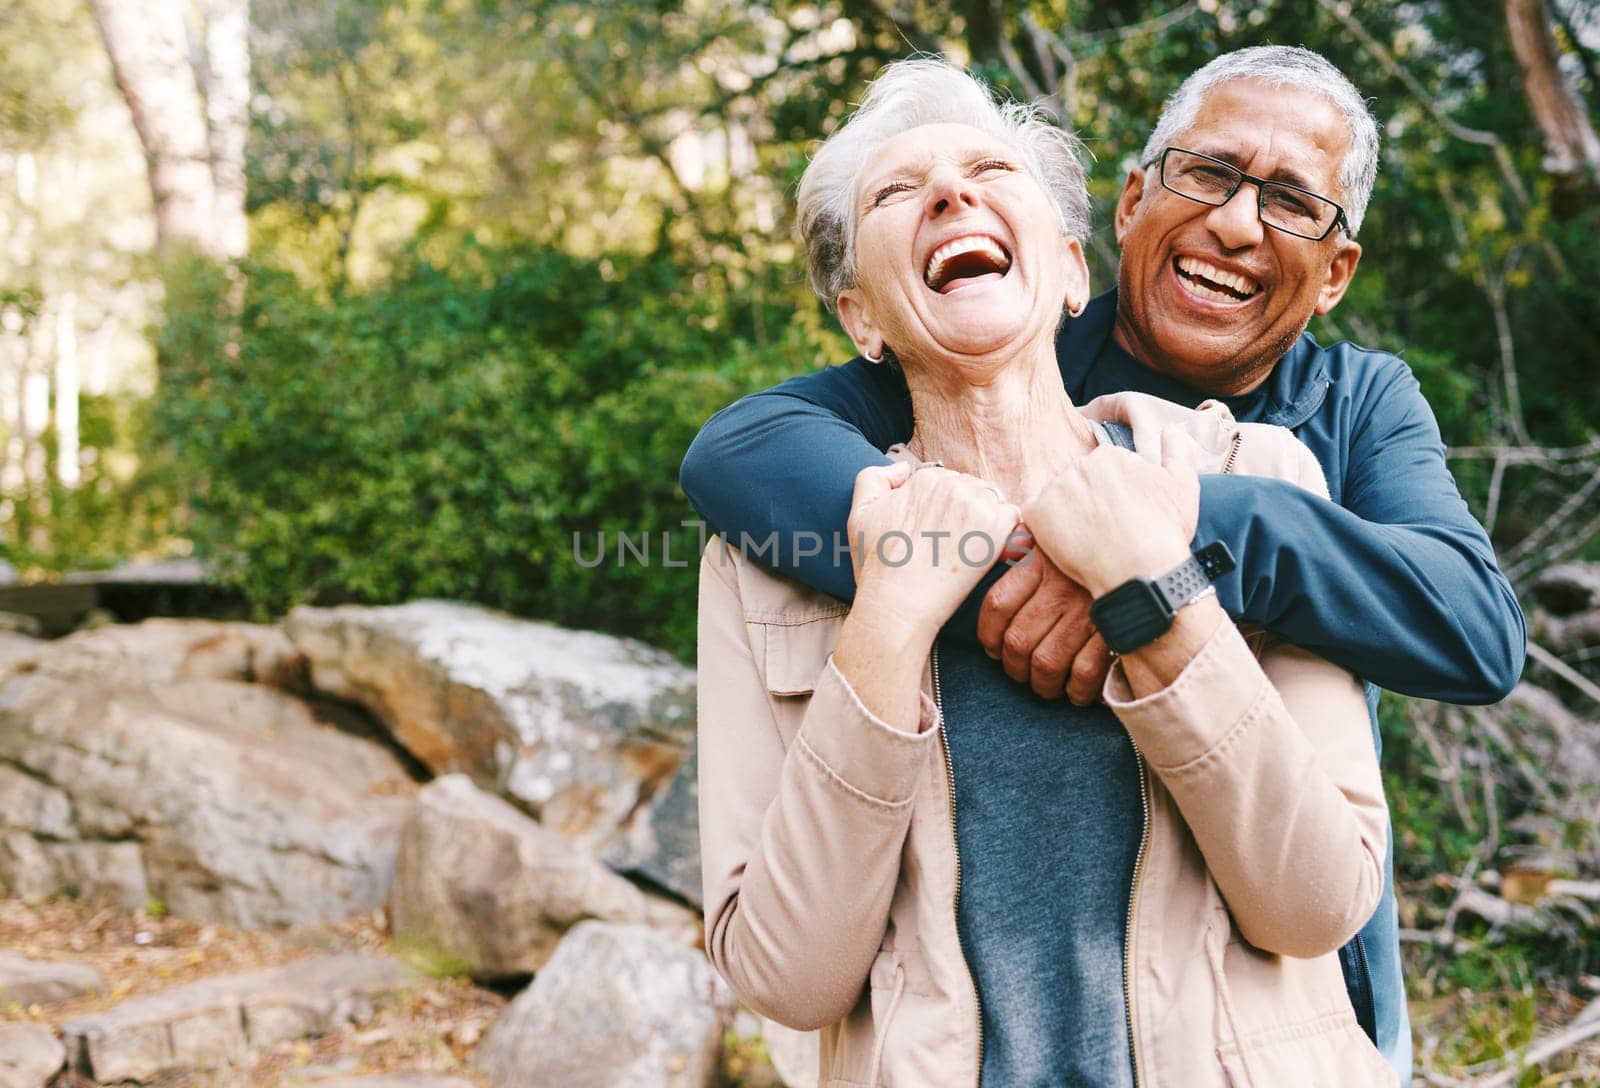 Hiking, laugh and romance with a senior couple hugging while in the woods or nature forest together in summer for a hike. Fun, joke and bonding with a mature man and woman enjoying retirement outdoor.